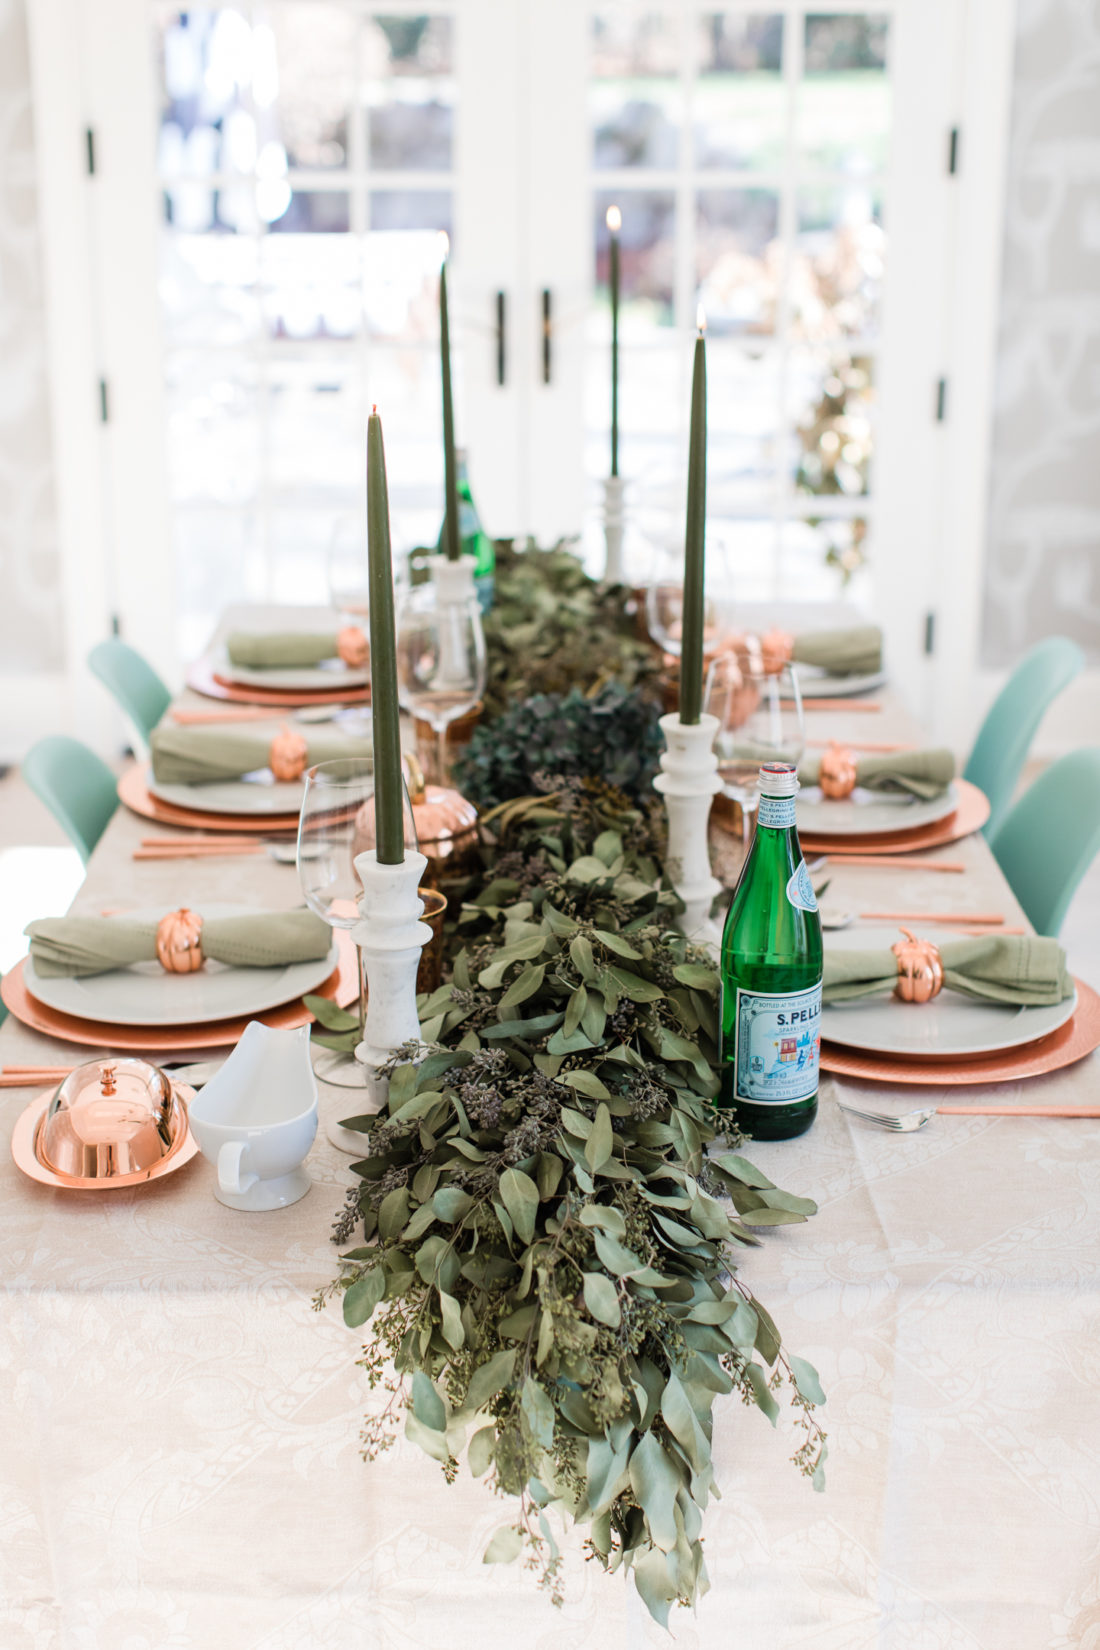 A eucaluptus garland, marble candlesticks with green candles, and a green and copper color scheme add style to Eva Amurri Martino's thanksgiving table